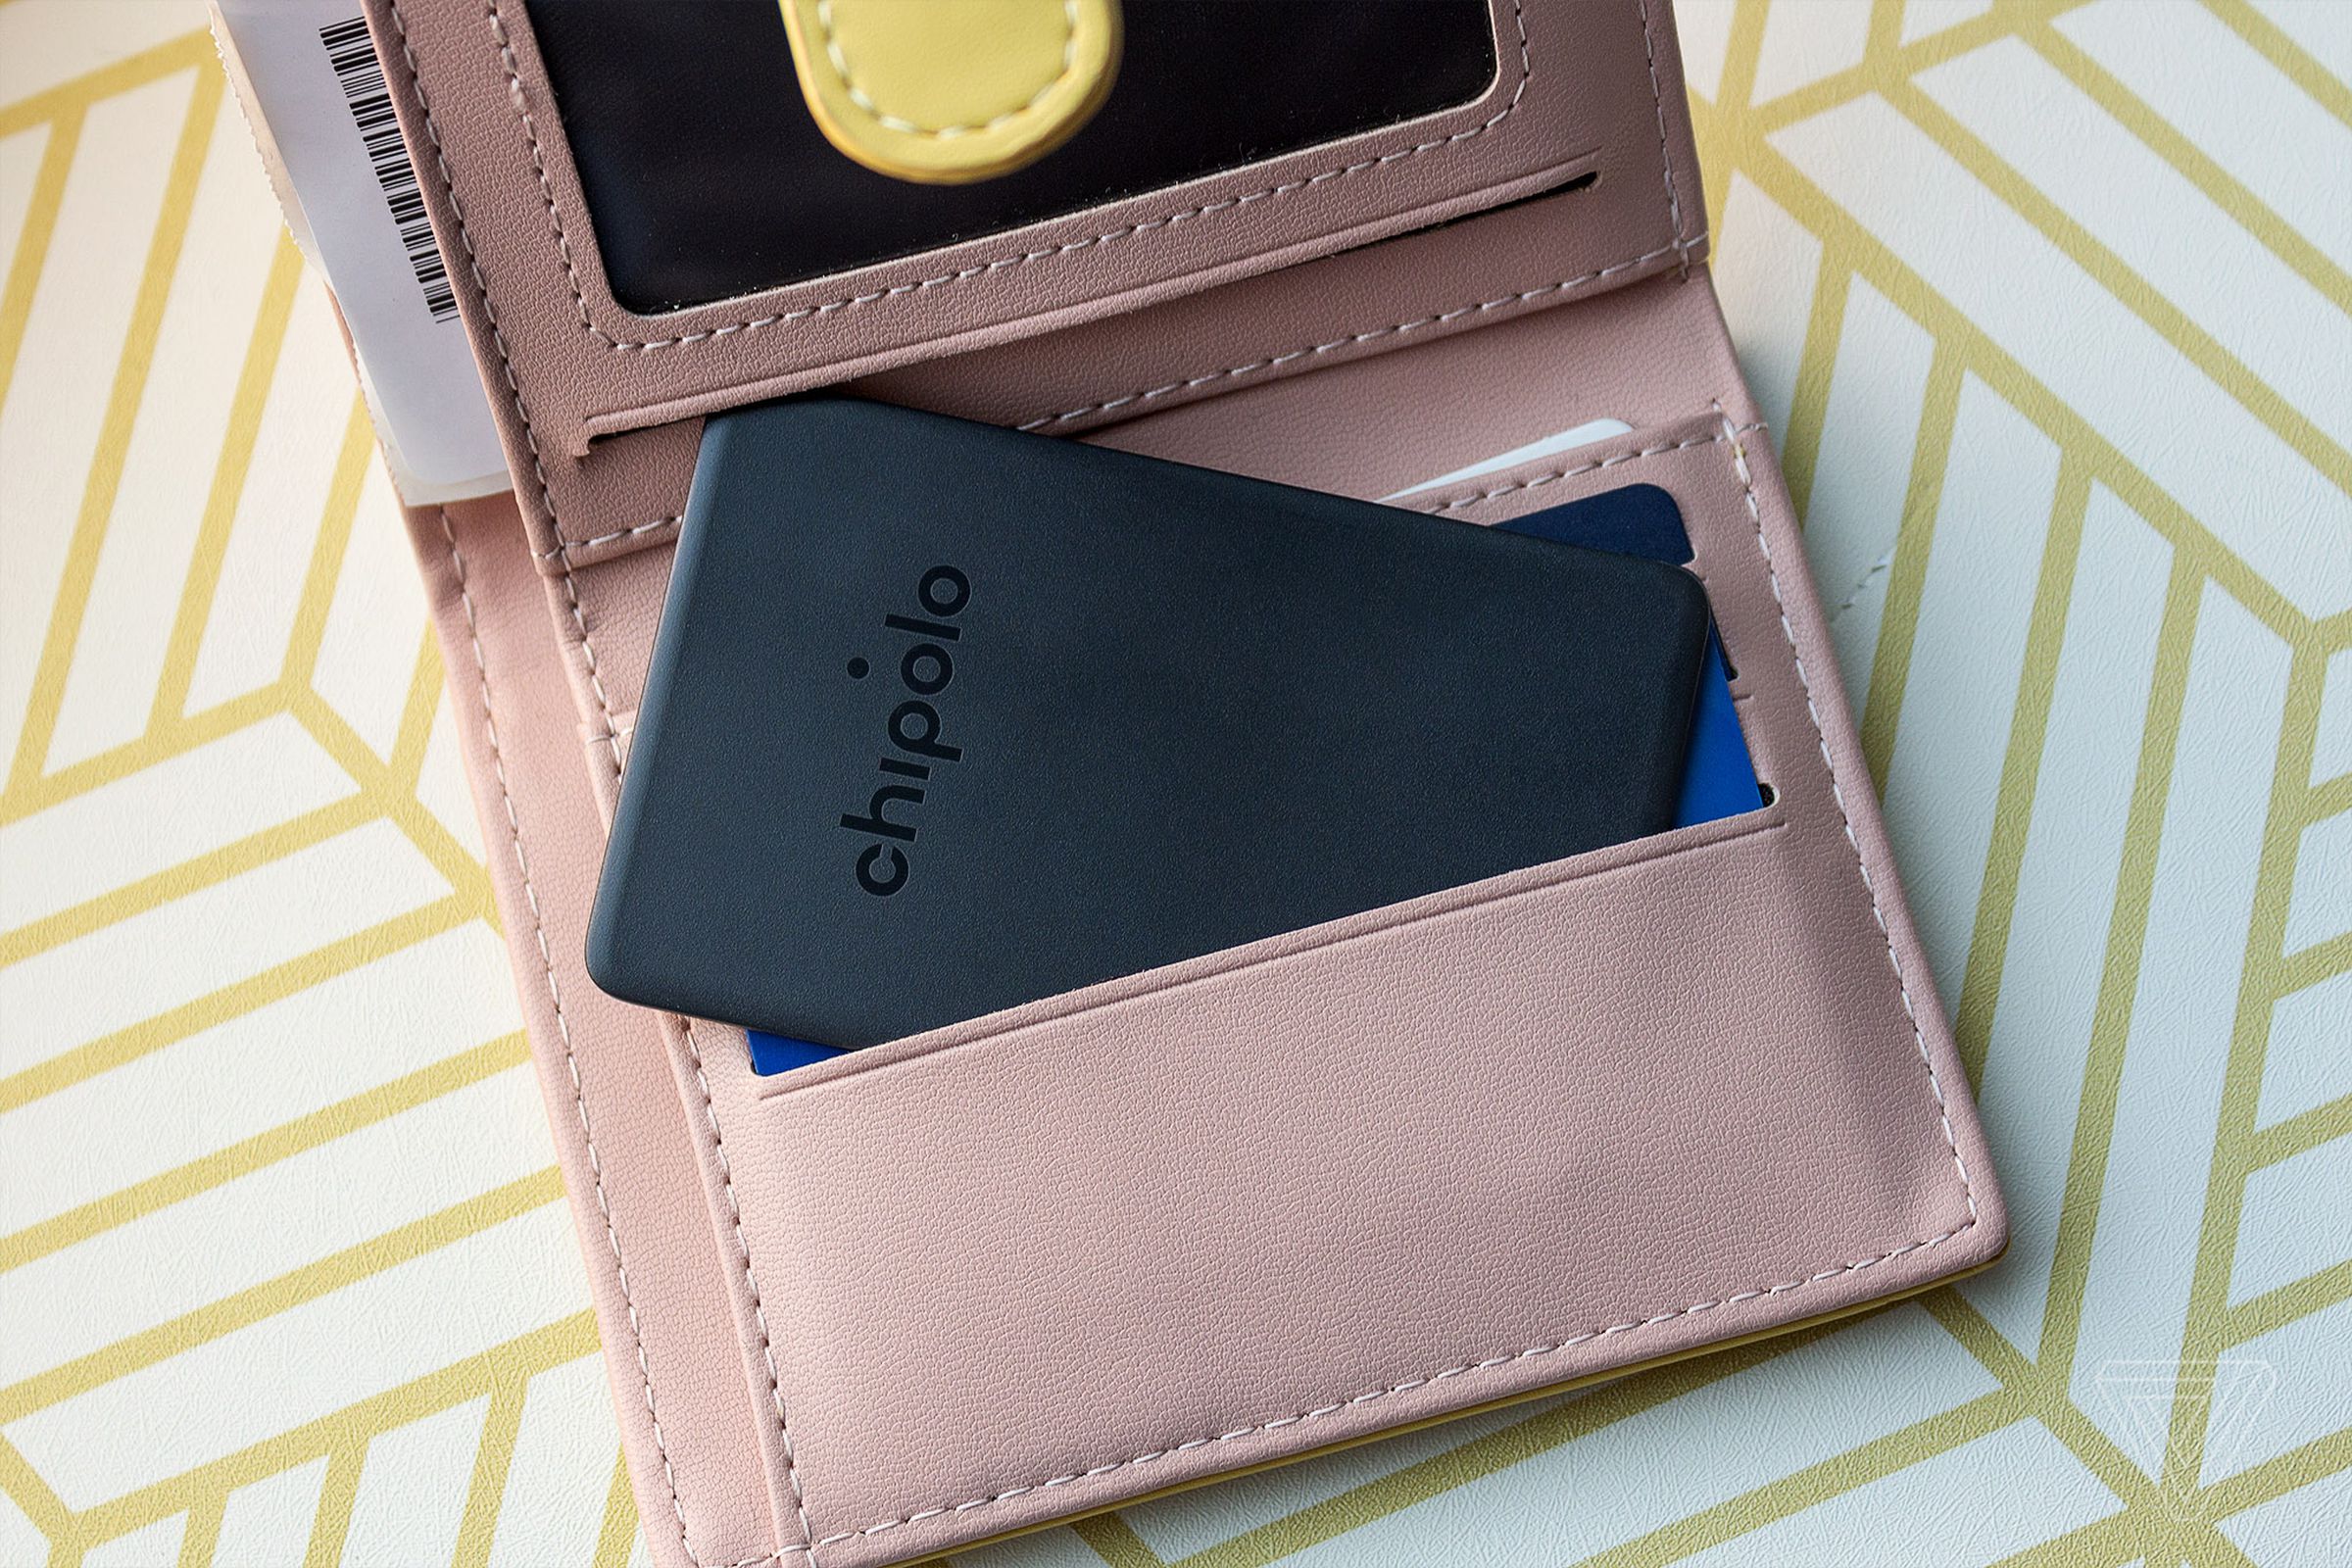 Chipolo Card Spot in a pink wallet